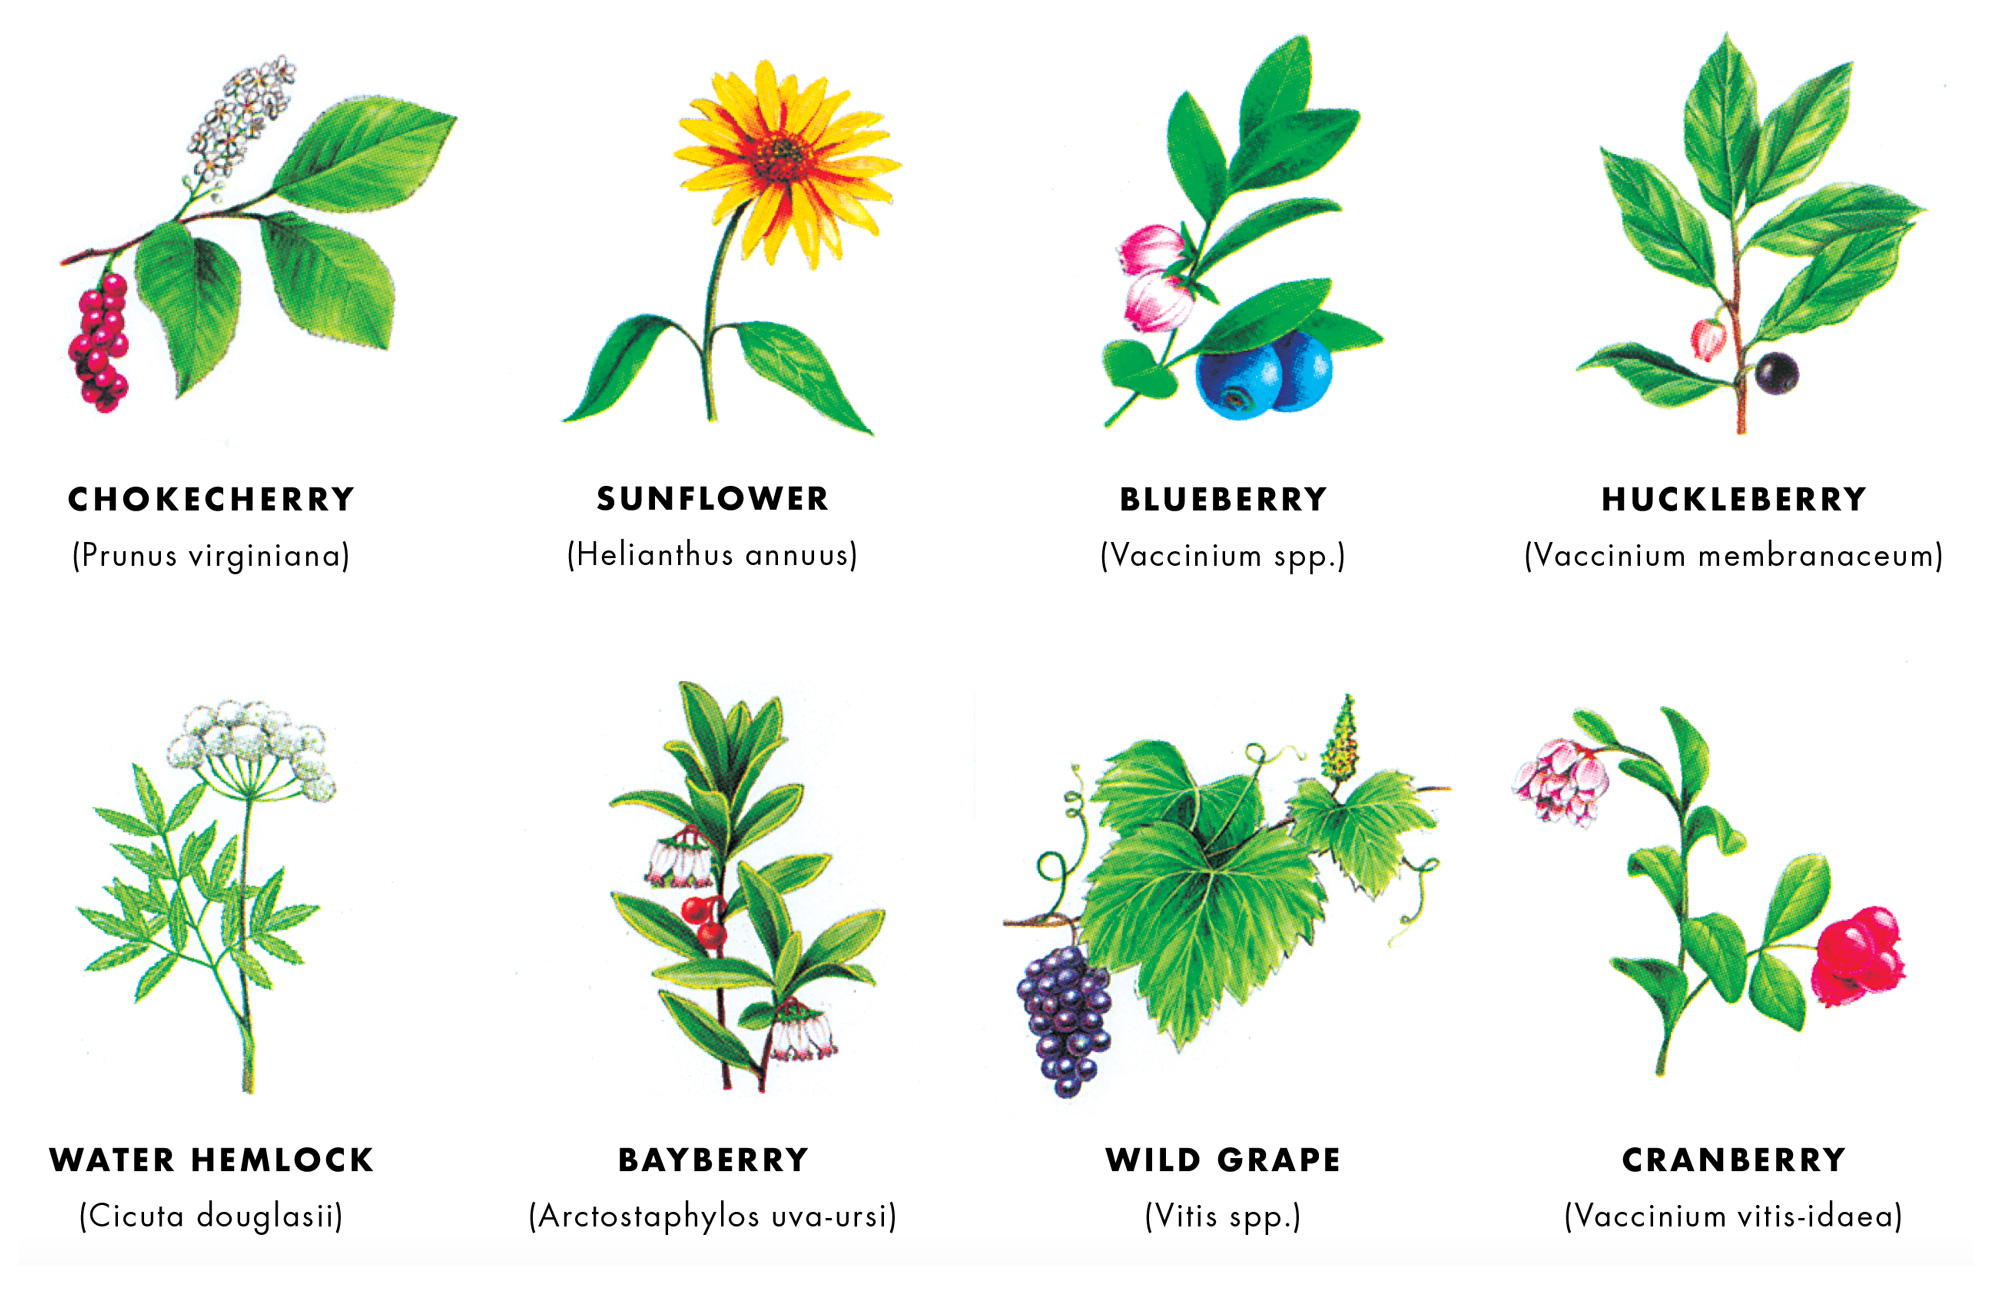 Illustrations of edible wild plants that Thoreau would have recognized: chokecherry, sunflower, blueberry, huckleberry. water hemlock, bayberry, wild grape, and cranberry.